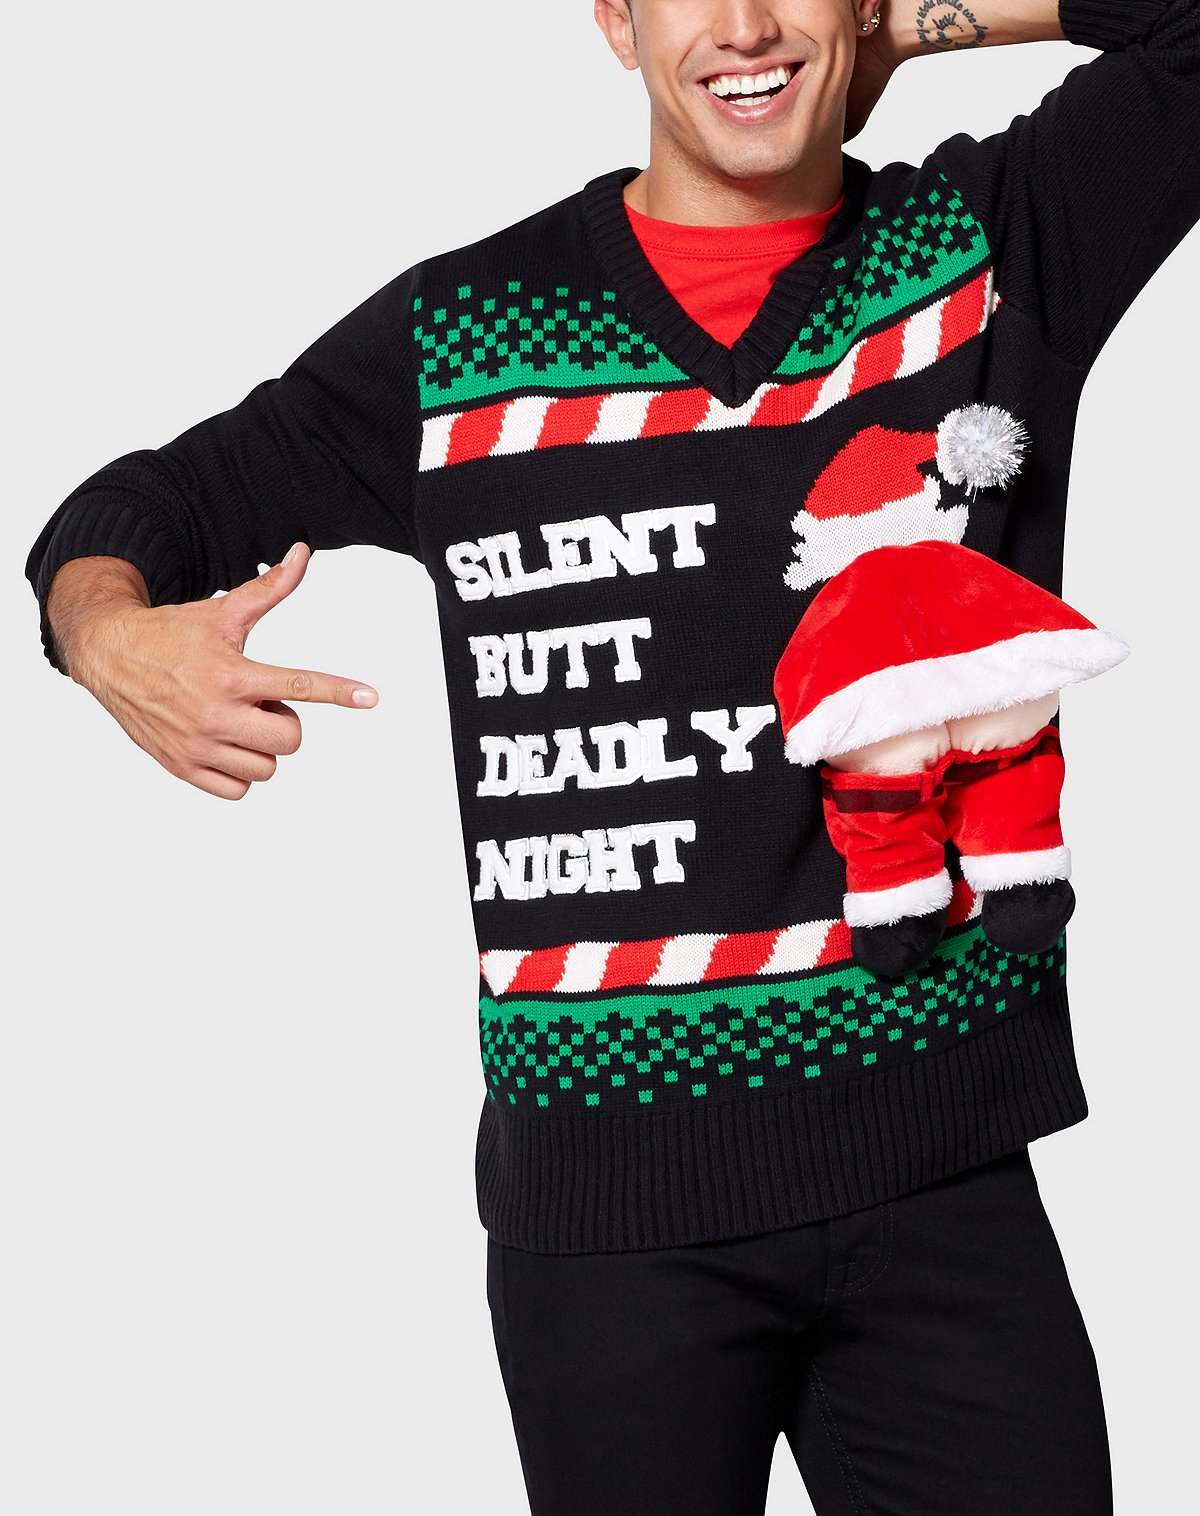 Top 10 Funny Ugly Christmas Sweaters of 2018 – Spencers Party Blog